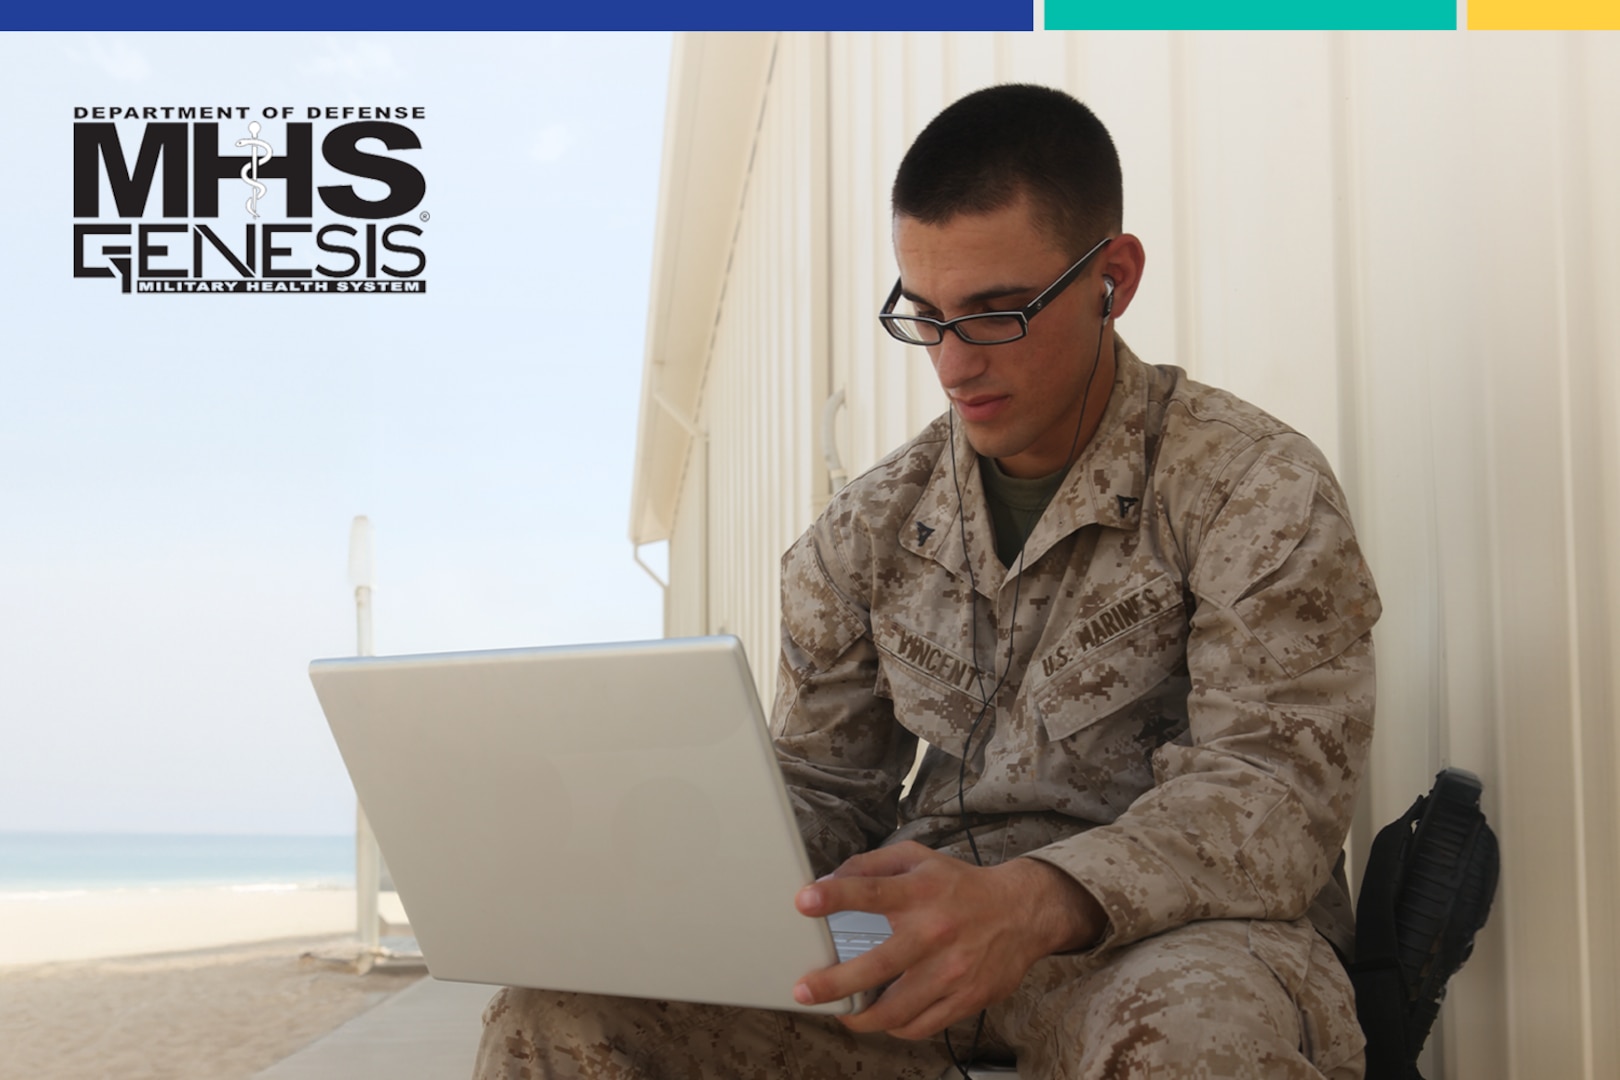 A Marine looks at his laptop